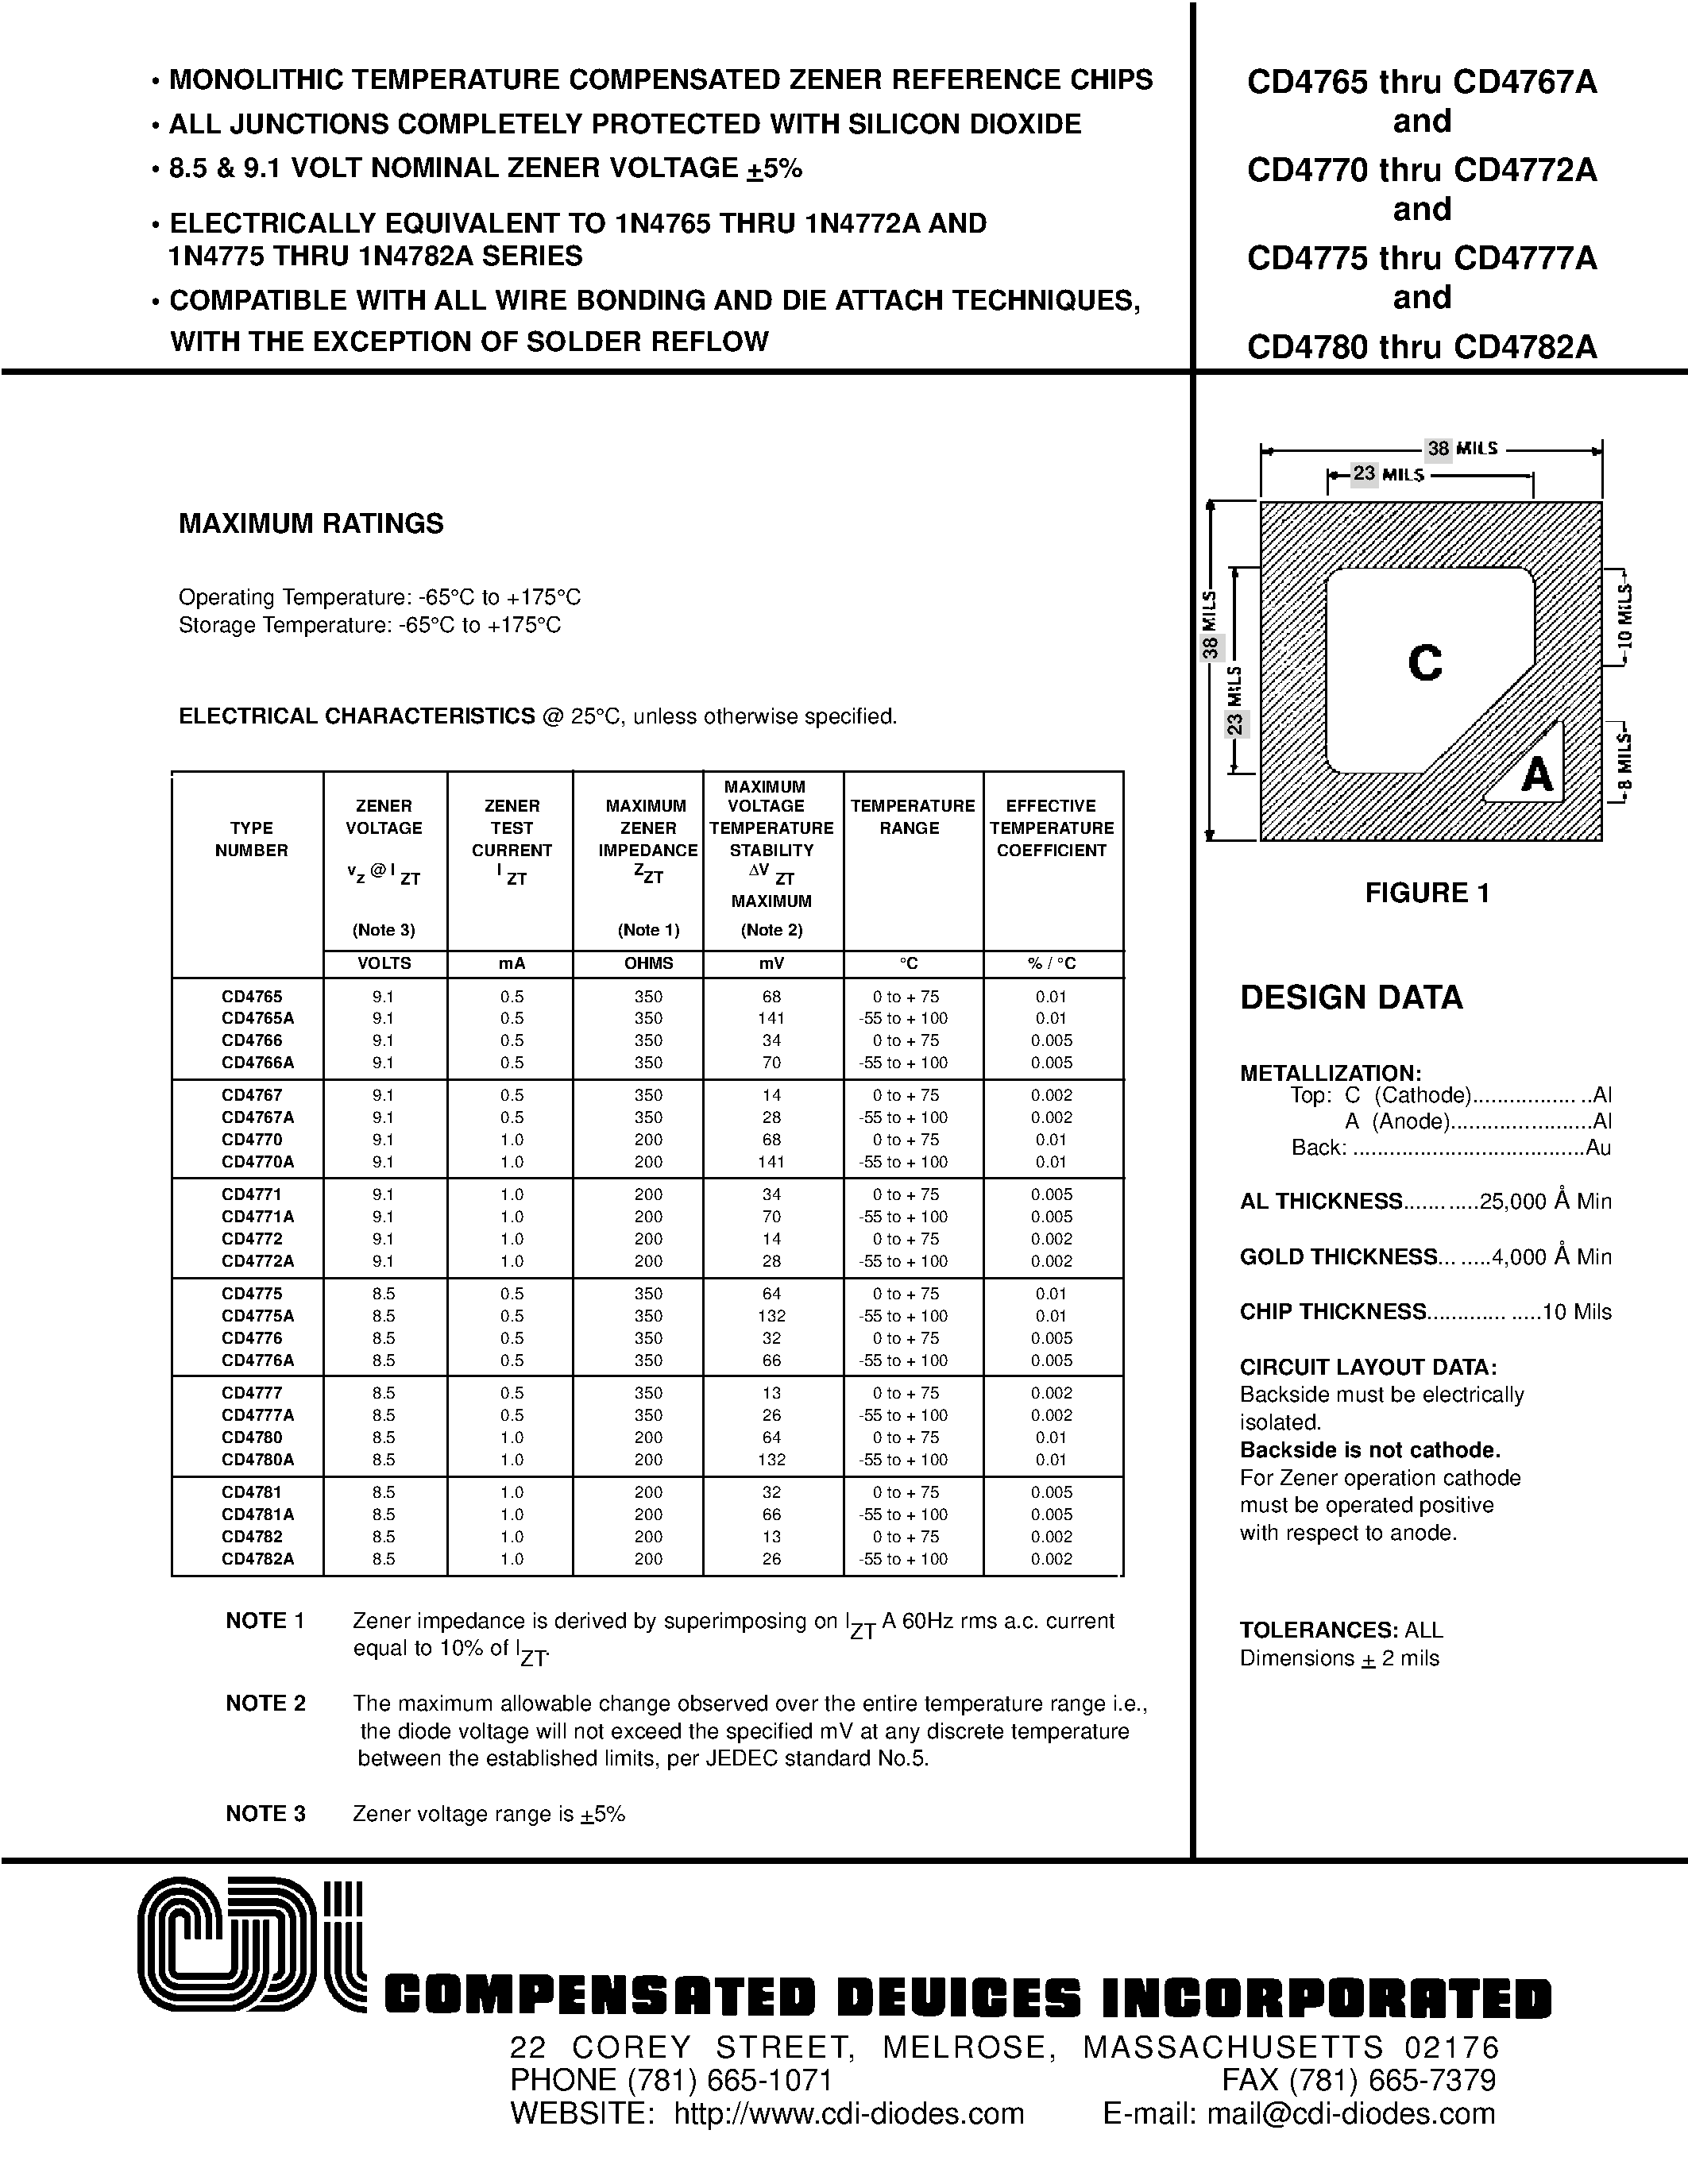 Datasheet CD4766 - MONOLITHIC TEMPERATURE COMPENSATED ZENER REFERENCE CHIPS page 1